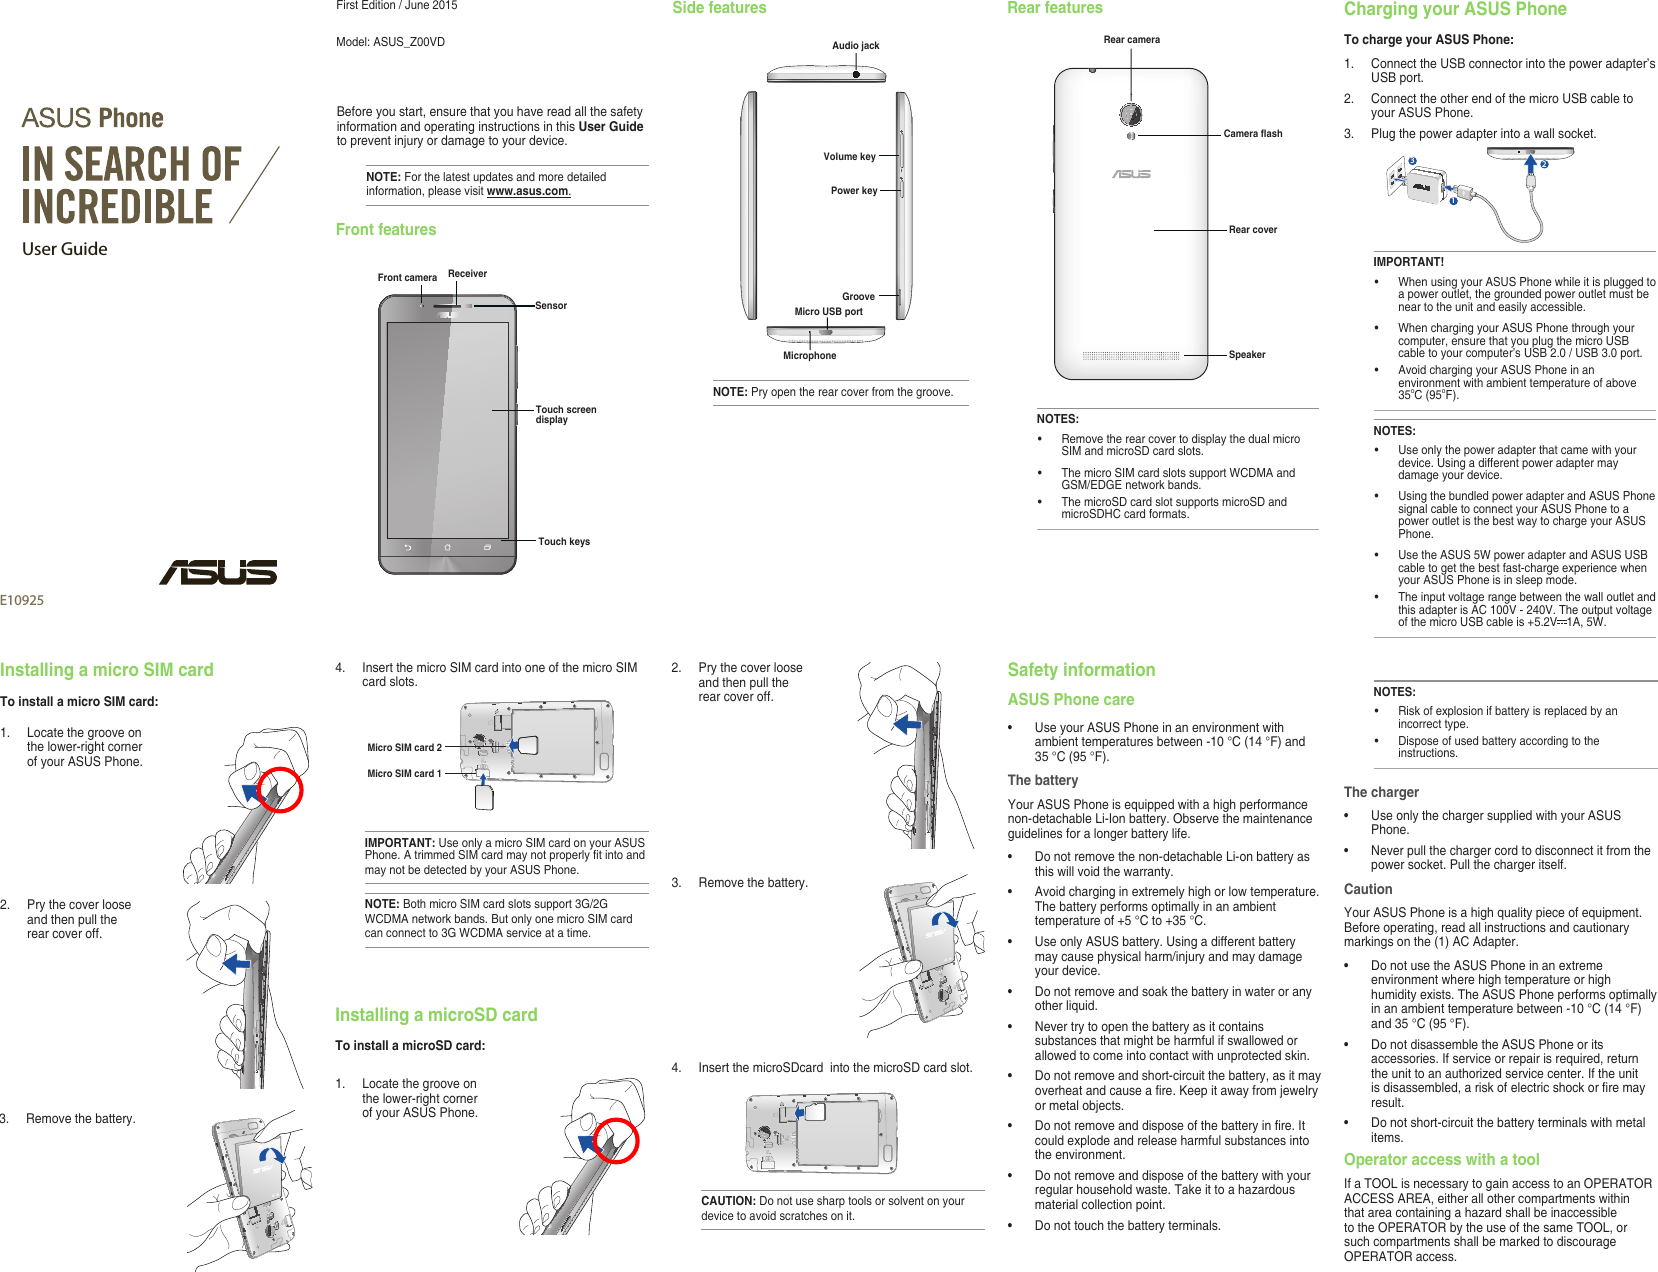 User GuideE10925First Edition / June 2015Model: ASUS_Z00VD  Before you start, ensure that you have read all the safety information and operating instructions in this User Guide to prevent injury or damage to your device.NOTE: For the latest updates and more detailed information, please visit www.asus.com.Front featuresFront cameraTouch screen displayReceiverTouch keysSensorSide featuresNOTE: Pry open the rear cover from the groove.Micro USB portAudio jackGrooveVolume keyMicrophonePower keyRear featuresNOTES:• RemovetherearcovertodisplaythedualmicroSIM and microSD card slots.• ThemicroSIMcardslotssupportWCDMAandGSM/EDGE network bands. • ThemicroSDcardslotsupportsmicroSDandmicroSDHCcardformats.Rear cameraRear coverSpeakerCamera flashCharging your ASUS PhoneTo charge your ASUS Phone:1. ConnecttheUSBconnectorintothepoweradapter’sUSB port.2. ConnecttheotherendofthemicroUSBcabletoyour ASUS Phone. 3.   Plug the power adapter into a wall socket.312NOTES:• Useonlythepoweradapterthatcamewithyourdevice. Using a different power adapter may damage your device.• UsingthebundledpoweradapterandASUSPhonesignal cable to connect your ASUS Phone to a power outlet is the best way to charge your ASUS Phone.• UsetheASUS5WpoweradapterandASUSUSBcable to get the best fast-charge experience when your ASUS Phone is in sleep mode.• TheinputvoltagerangebetweenthewalloutletandthisadapterisAC100V-240V.Theoutputvoltageof the micro USB cable is +5.2V 1A,5W.IMPORTANT!• WhenusingyourASUSPhonewhileitispluggedtoa power outlet, the grounded power outlet must be near to the unit and easily accessible.• WhenchargingyourASUSPhonethroughyourcomputer, ensure that you plug the micro USB cabletoyourcomputer’sUSB2.0/USB3.0port.• AvoidchargingyourASUSPhoneinanenvironment with ambient temperature of above 35oC(95oF). 3. Removethebattery.1.  Locate the groove on the lower-right corner of your ASUS Phone.Installing a micro SIM cardTo install a micro SIM card:2.  Pry the cover loose and then pull the rear cover off. 4. InsertthemicroSIMcardintooneofthemicroSIMcard slots.Installing a microSD cardTo install a microSD card:1.  Locate the groove on the lower-right corner of your ASUS Phone.IMPORTANT: Use only a micro SIM card on your ASUS Phone.AtrimmedSIMcardmaynotproperlytintoandmay not be detected by your ASUS Phone.NOTE: Both micro SIM card slots support 3G/2G WCDMAnetworkbands.ButonlyonemicroSIMcardcanconnectto3GWCDMAserviceatatime.Micro SIM card 1Micro SIM card 2CAUTION: Do not use sharp tools or solvent on your device to avoid scratches on it.4. InsertthemicroSDcardintothemicroSDcardslot.3. Removethebattery.2.  Pry the cover loose and then pull the rear cover off. Safety informationASUS Phone care• UseyourASUSPhoneinanenvironmentwithambienttemperaturesbetween-10°C(14°F)and35°C(95°F).The batteryYour ASUS Phone is equipped with a high performance non-detachable Li-Ion battery. Observe the maintenance guidelines for a longer battery life.• Donotremovethenon-detachableLi-onbatteryasthis will void the warranty.• Avoidcharginginextremelyhighorlowtemperature.Thebatteryperformsoptimallyinanambienttemperatureof+5°Cto+35°C.• UseonlyASUSbattery.Usingadifferentbatterymay cause physical harm/injury and may damage your device.• Donotremoveandsoakthebatteryinwateroranyother liquid.• Nevertrytoopenthebatteryasitcontainssubstances that might be harmful if swallowed or allowed to come into contact with unprotected skin.• Donotremoveandshort-circuitthebattery,asitmayoverheatandcauseare.Keepitawayfromjewelryor metal objects.• Donotremoveanddisposeofthebatteryinre.Itcould explode and release harmful substances into the environment.• Donotremoveanddisposeofthebatterywithyourregularhouseholdwaste.Takeittoahazardousmaterial collection point.• Donottouchthebatteryterminals.NOTES:• Riskofexplosionifbatteryisreplacedbyanincorrect type.• Disposeofusedbatteryaccordingtotheinstructions.The charger• UseonlythechargersuppliedwithyourASUSPhone.• Neverpullthechargercordtodisconnectitfromthepower socket. Pull the charger itself.CautionYour ASUS Phone is a high quality piece of equipment. Before operating, read all instructions and cautionary markingsonthe(1)ACAdapter.• DonotusetheASUSPhoneinanextremeenvironment where high temperature or high humidityexists.TheASUSPhoneperformsoptimallyinanambienttemperaturebetween-10°C(14°F)and35°C(95°F).• DonotdisassembletheASUSPhoneoritsaccessories. If service or repair is required, return theunittoanauthorizedservicecenter.Iftheunitisdisassembled,ariskofelectricshockorremayresult.• Donotshort-circuitthebatteryterminalswithmetalitems.Operator access with a toolIfaTOOLisnecessarytogainaccesstoanOPERATORACCESSAREA,eitherallothercompartmentswithinthatareacontainingahazardshallbeinaccessibletotheOPERATORbytheuseofthesameTOOL,orsuch compartments shall be marked to discourage OPERATORaccess.